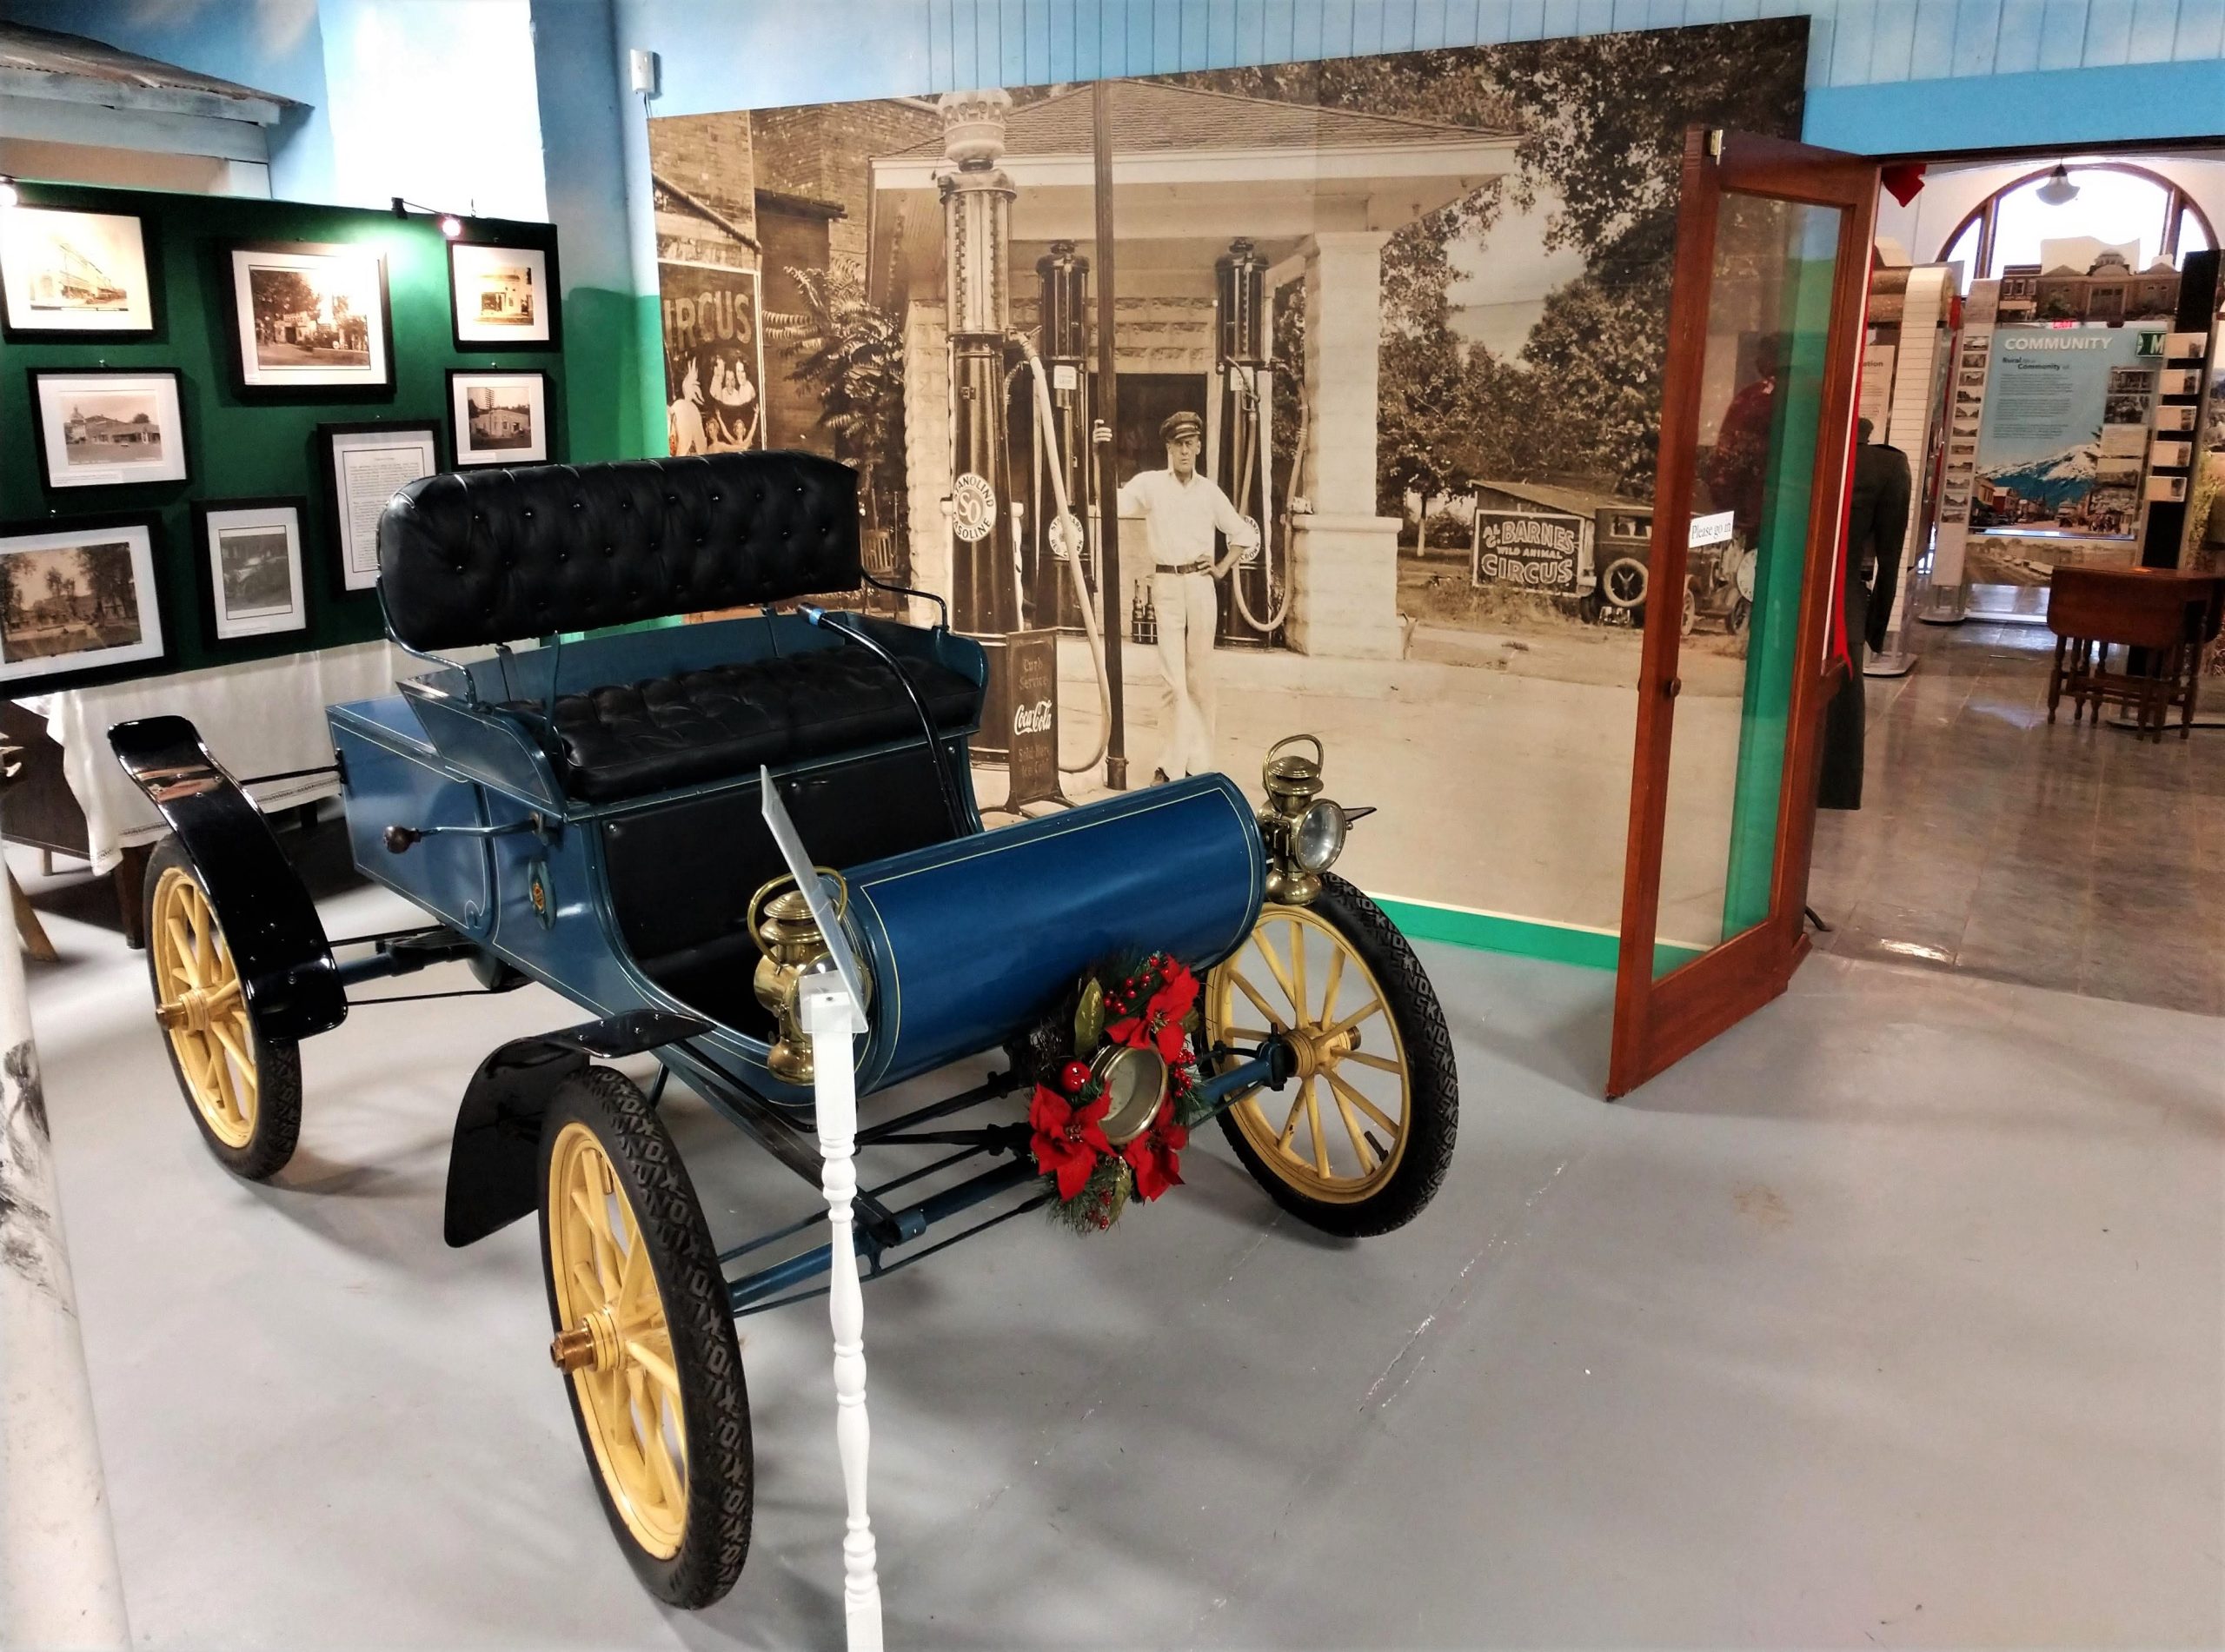 Photograph of vintage car and wall-size photograph of a filling station included in Old School Museum's companion exhibition.